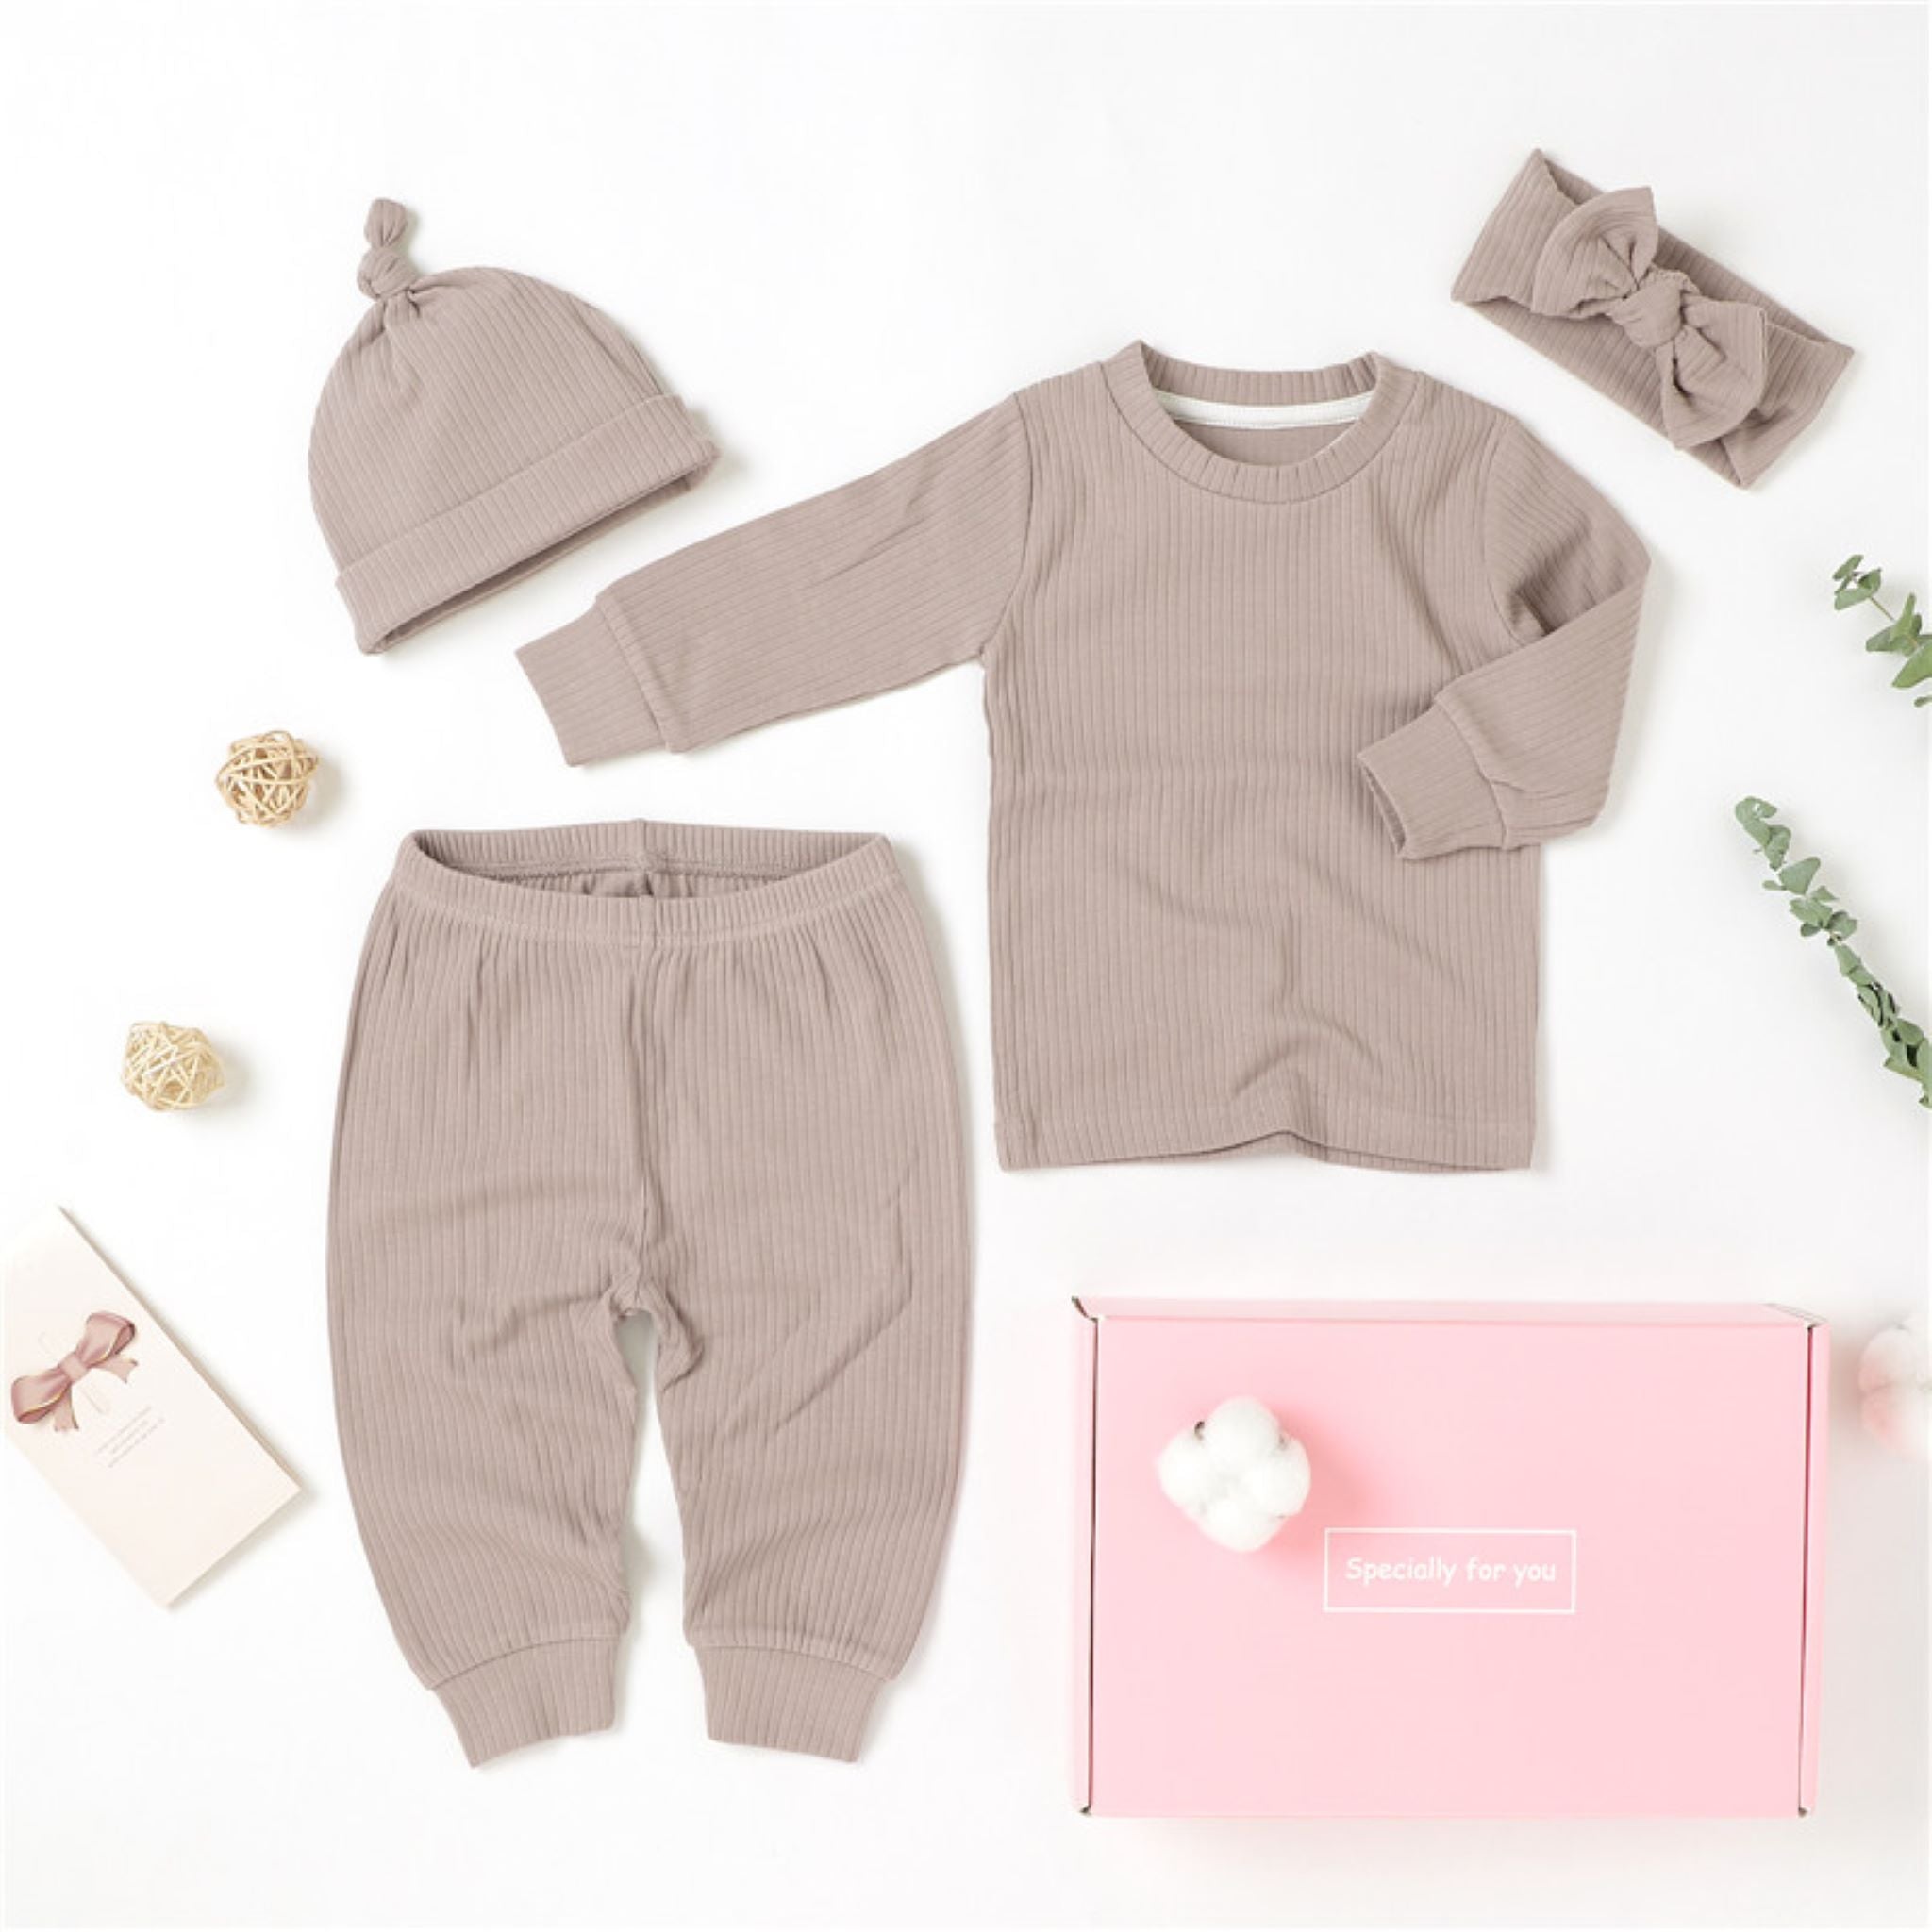 4 piece baby girl gift set in lavender.  The set includes a long sleeve top with matching pull on pants, a hat and a headband.  It is made from soft GOTS certified organic cotton.